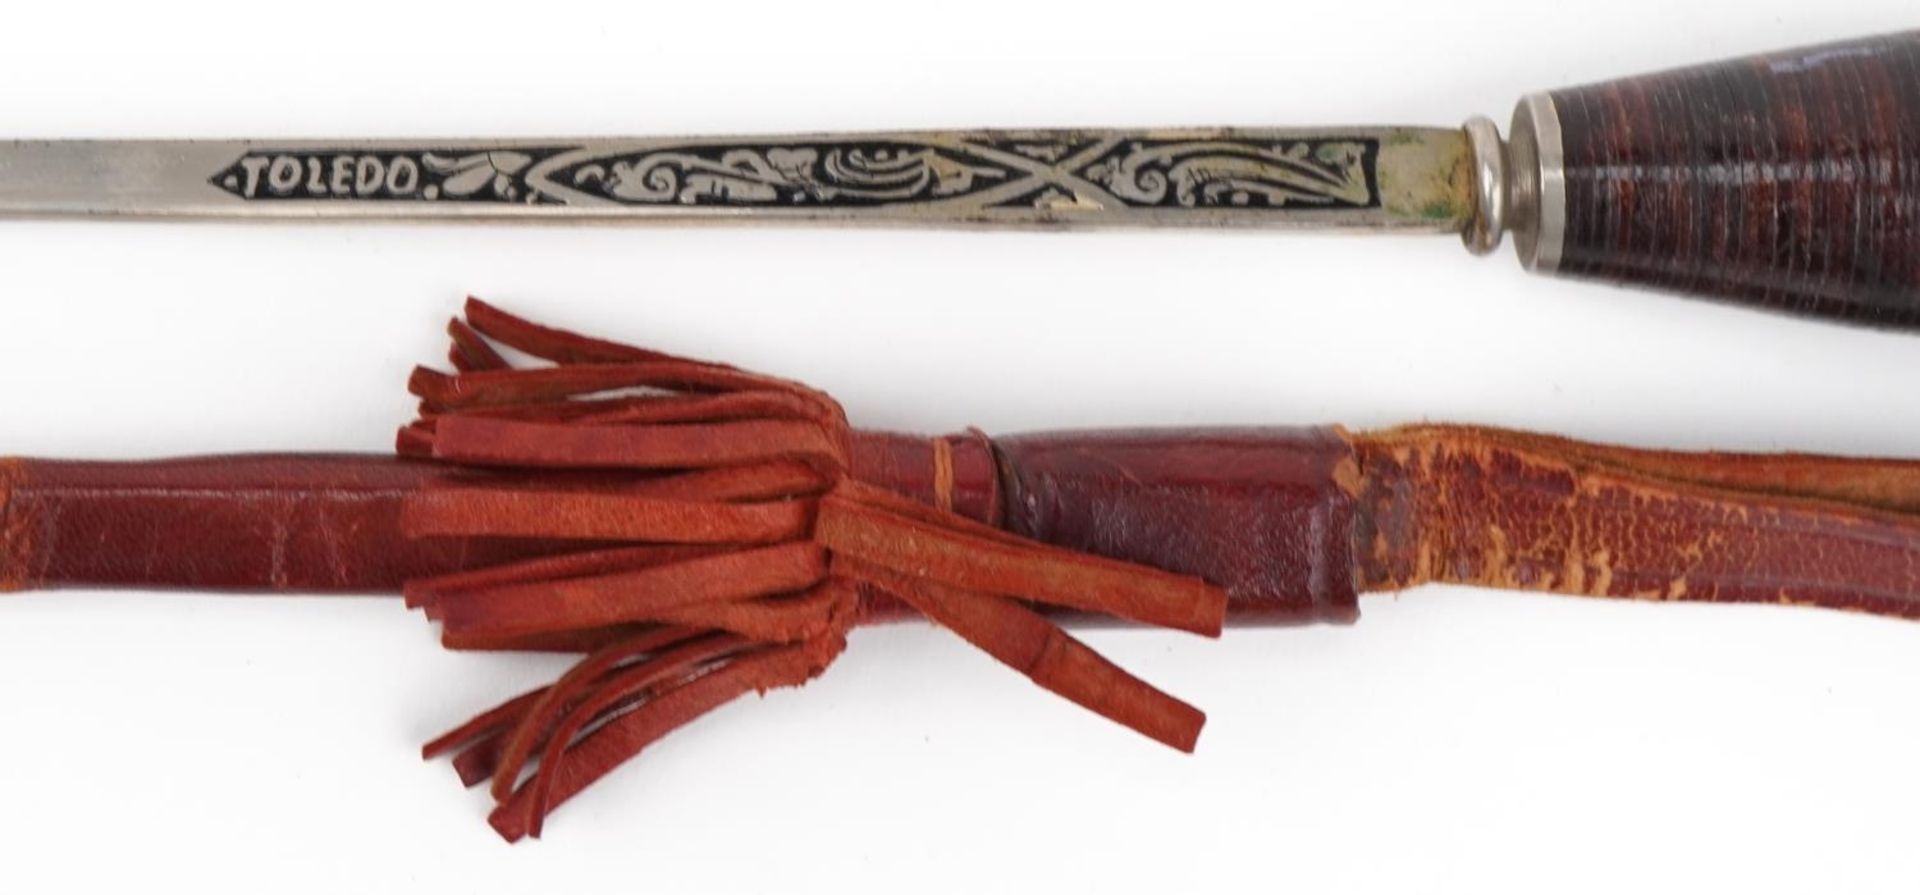 Spanish bull fighting souvenir sword with leather sheath and Toledo blade, 68.5cm in length - Image 3 of 4